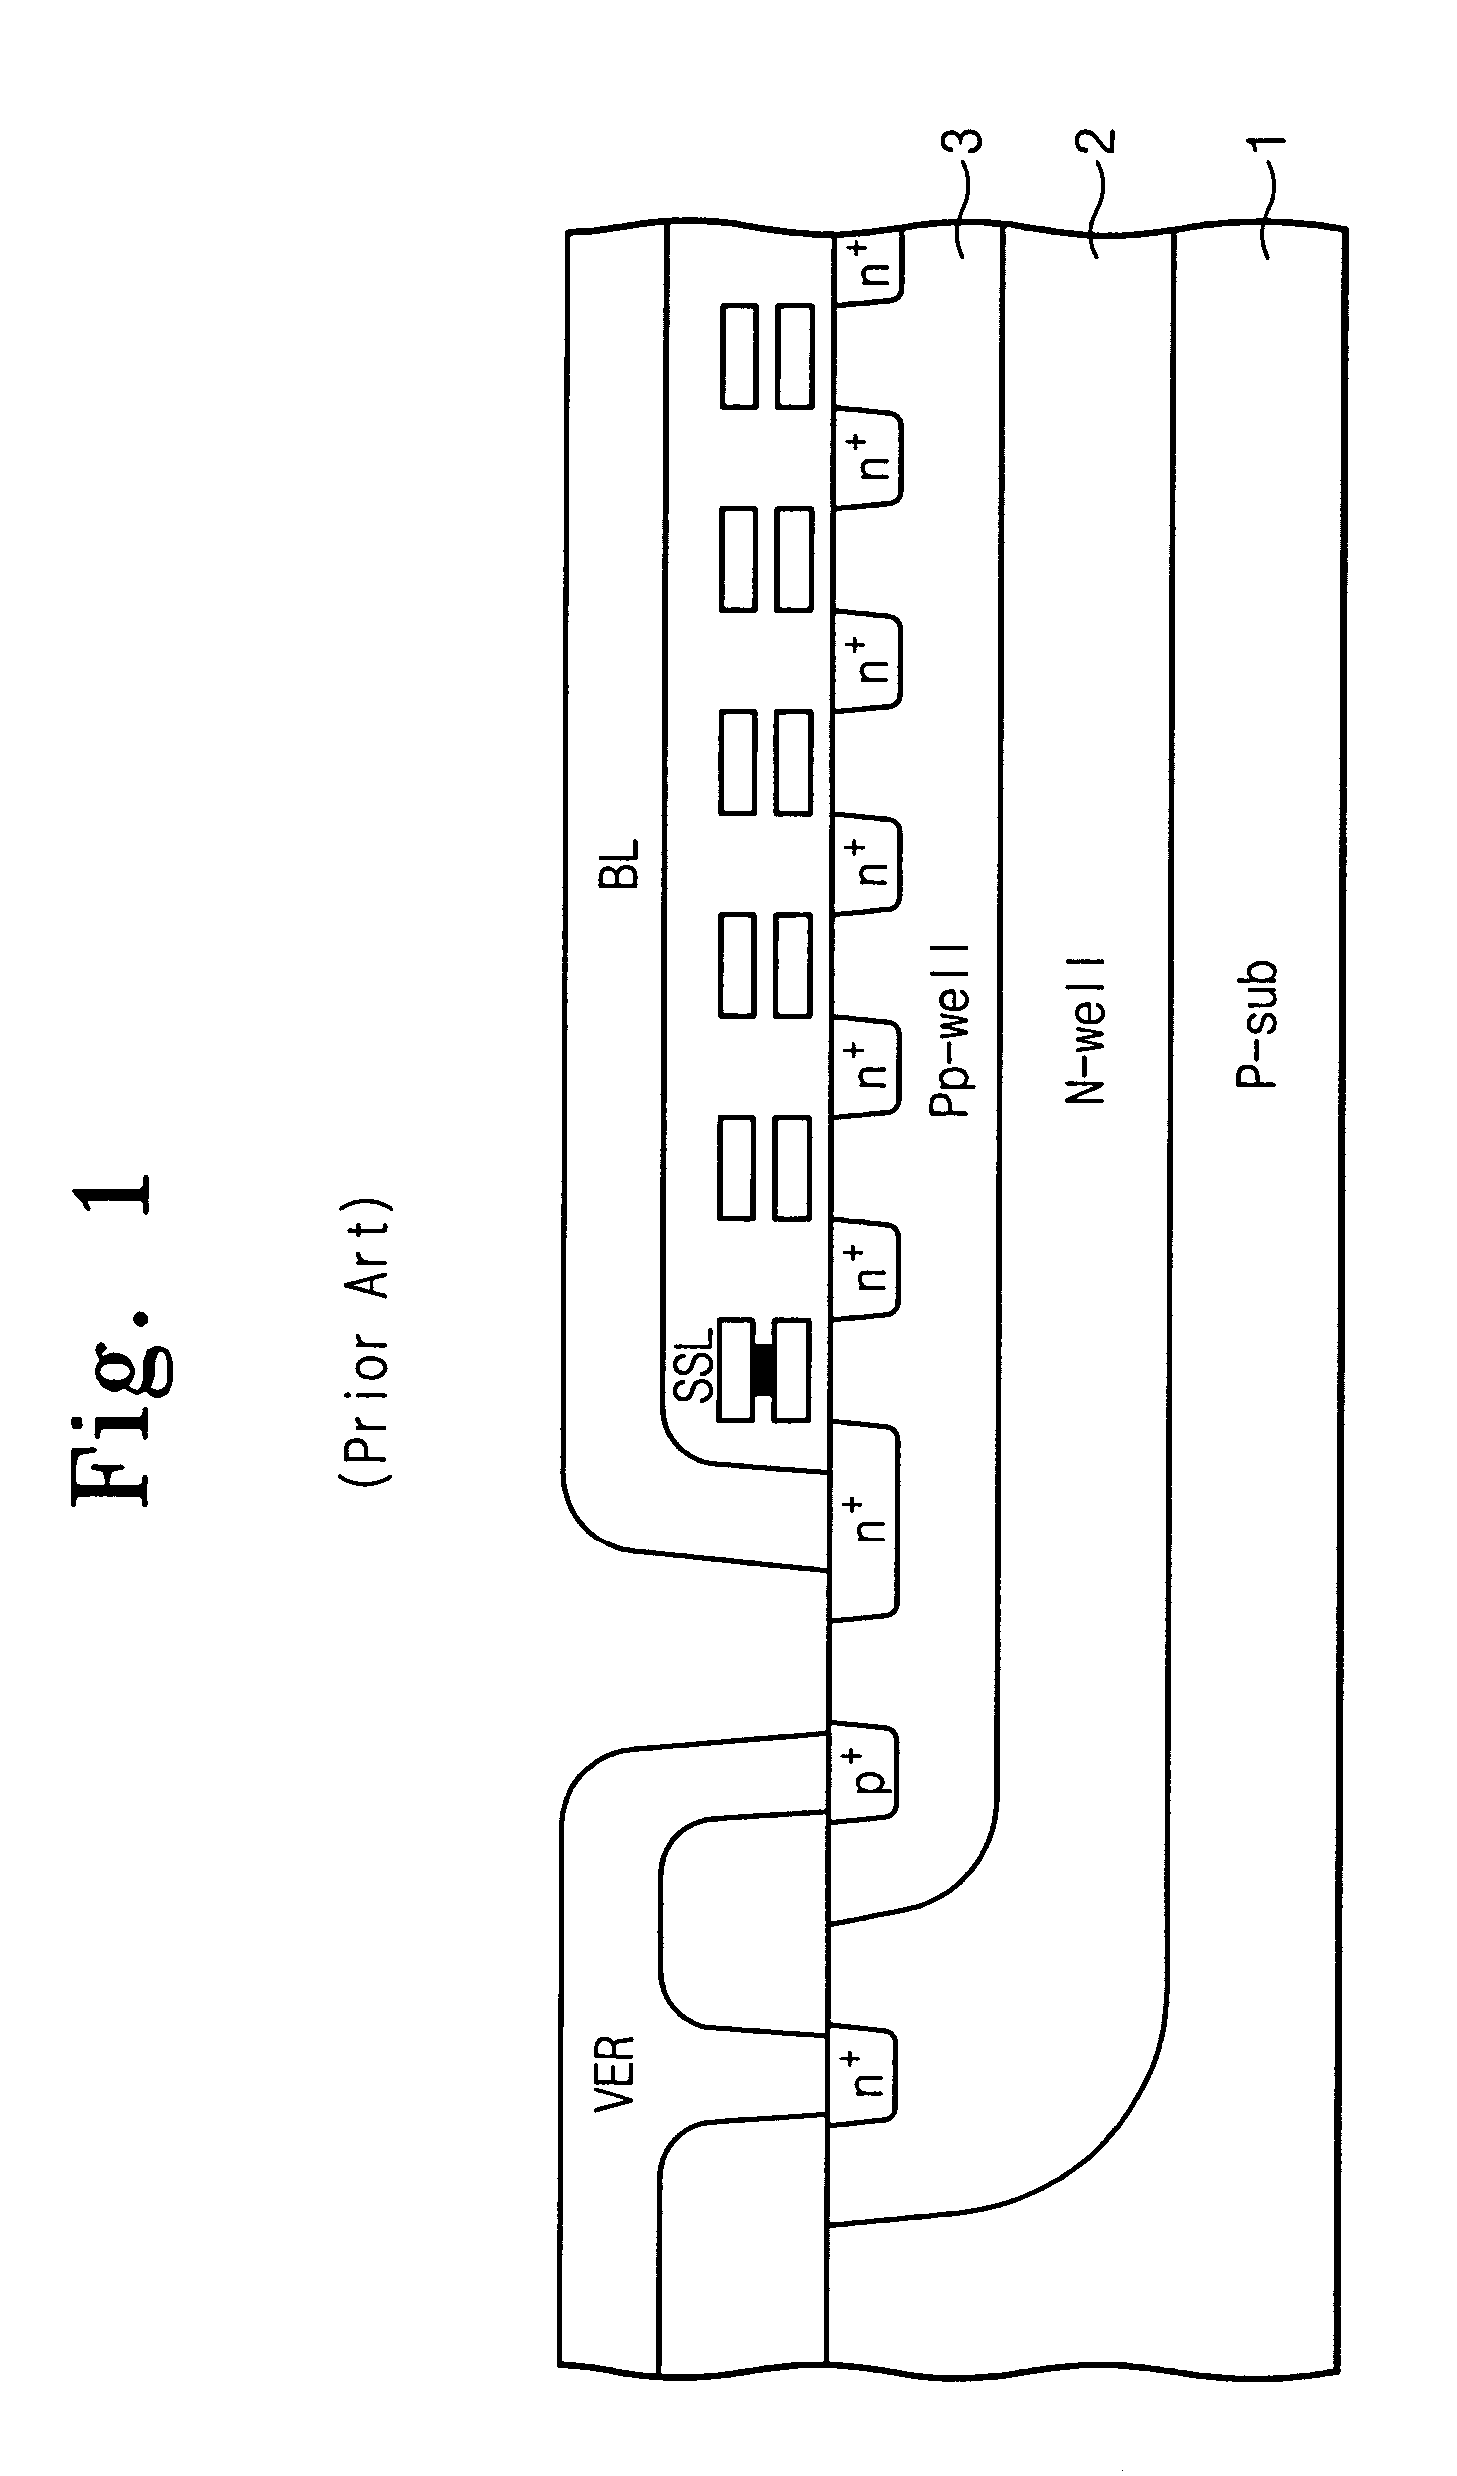 Nonvolatile memory device for preventing bitline high voltage from discharge